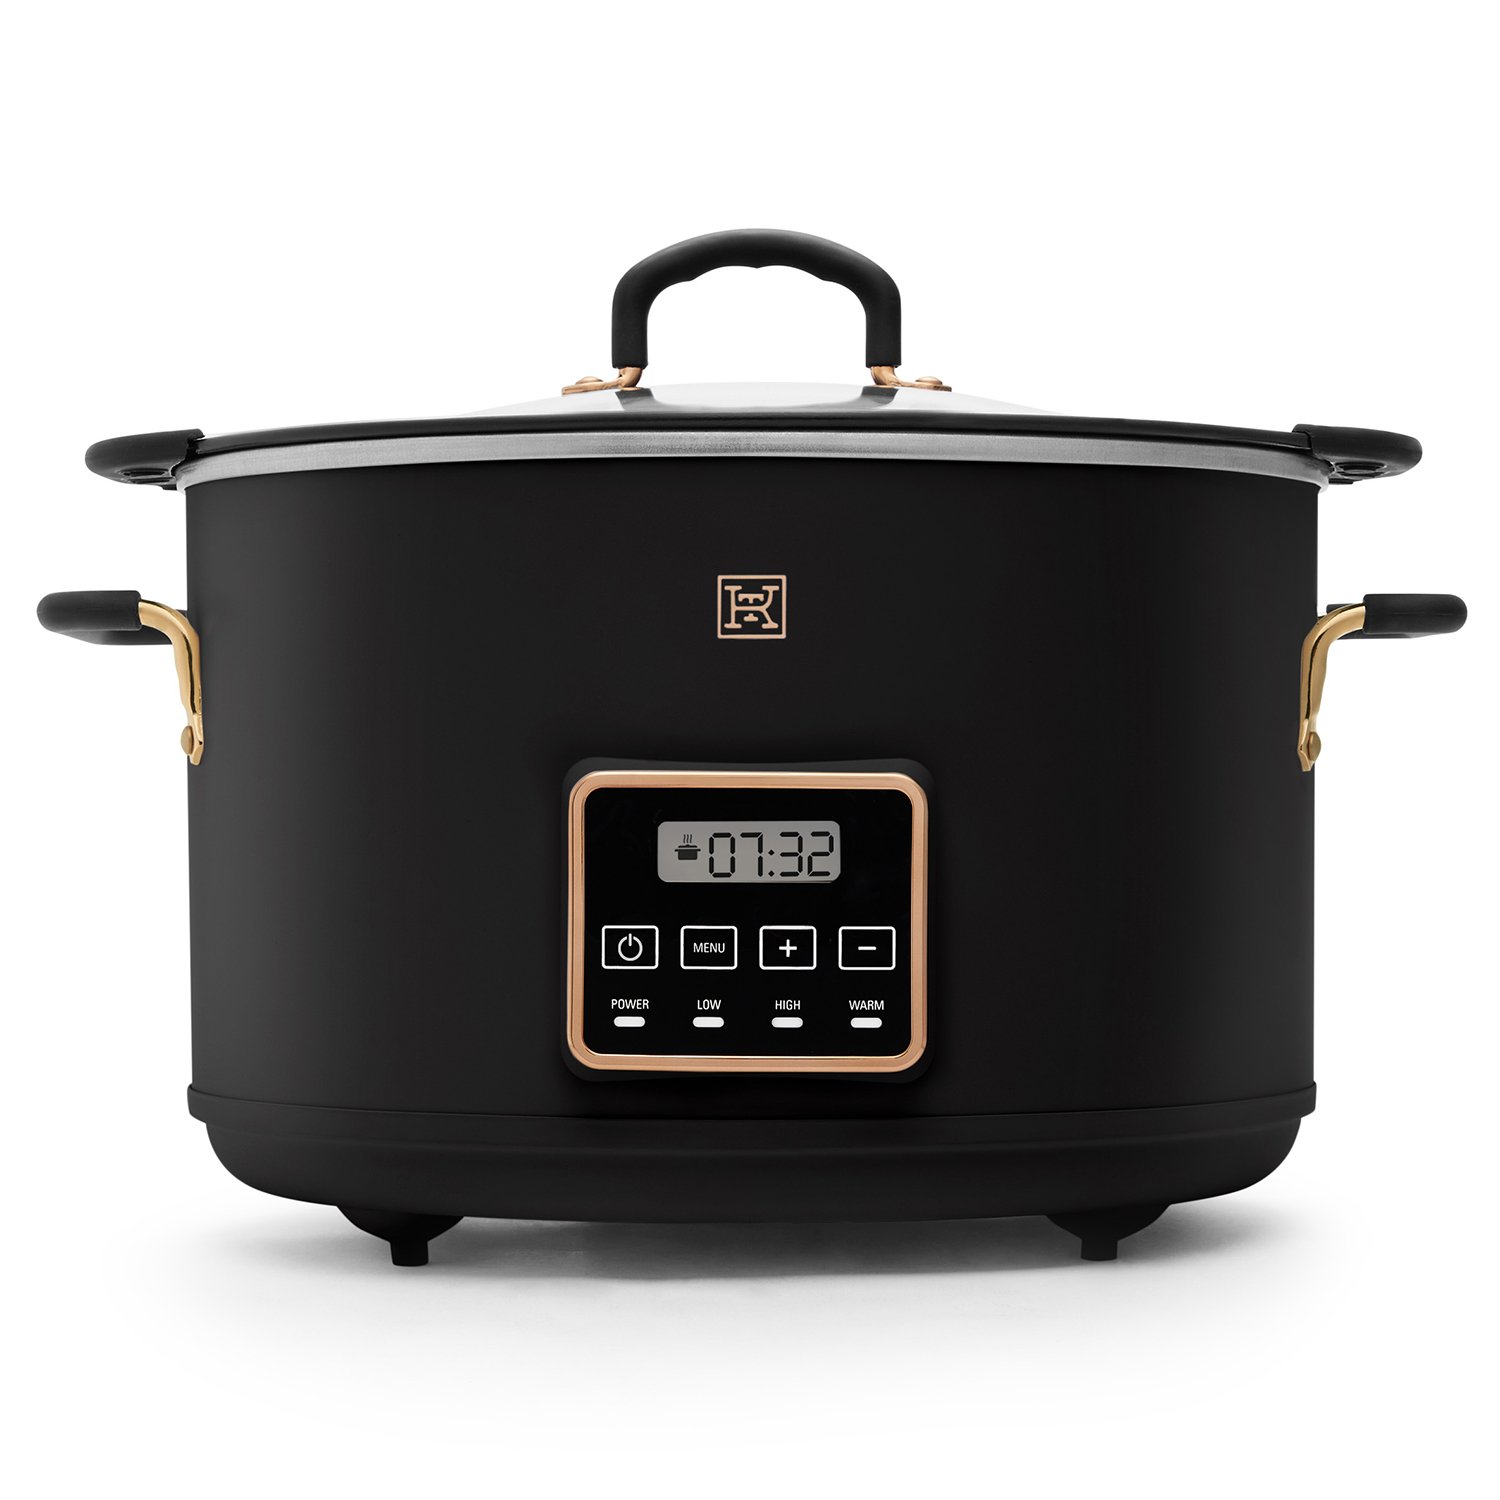 Crock-Pot Slow Cookers Are on Sale and Make Great Gifts